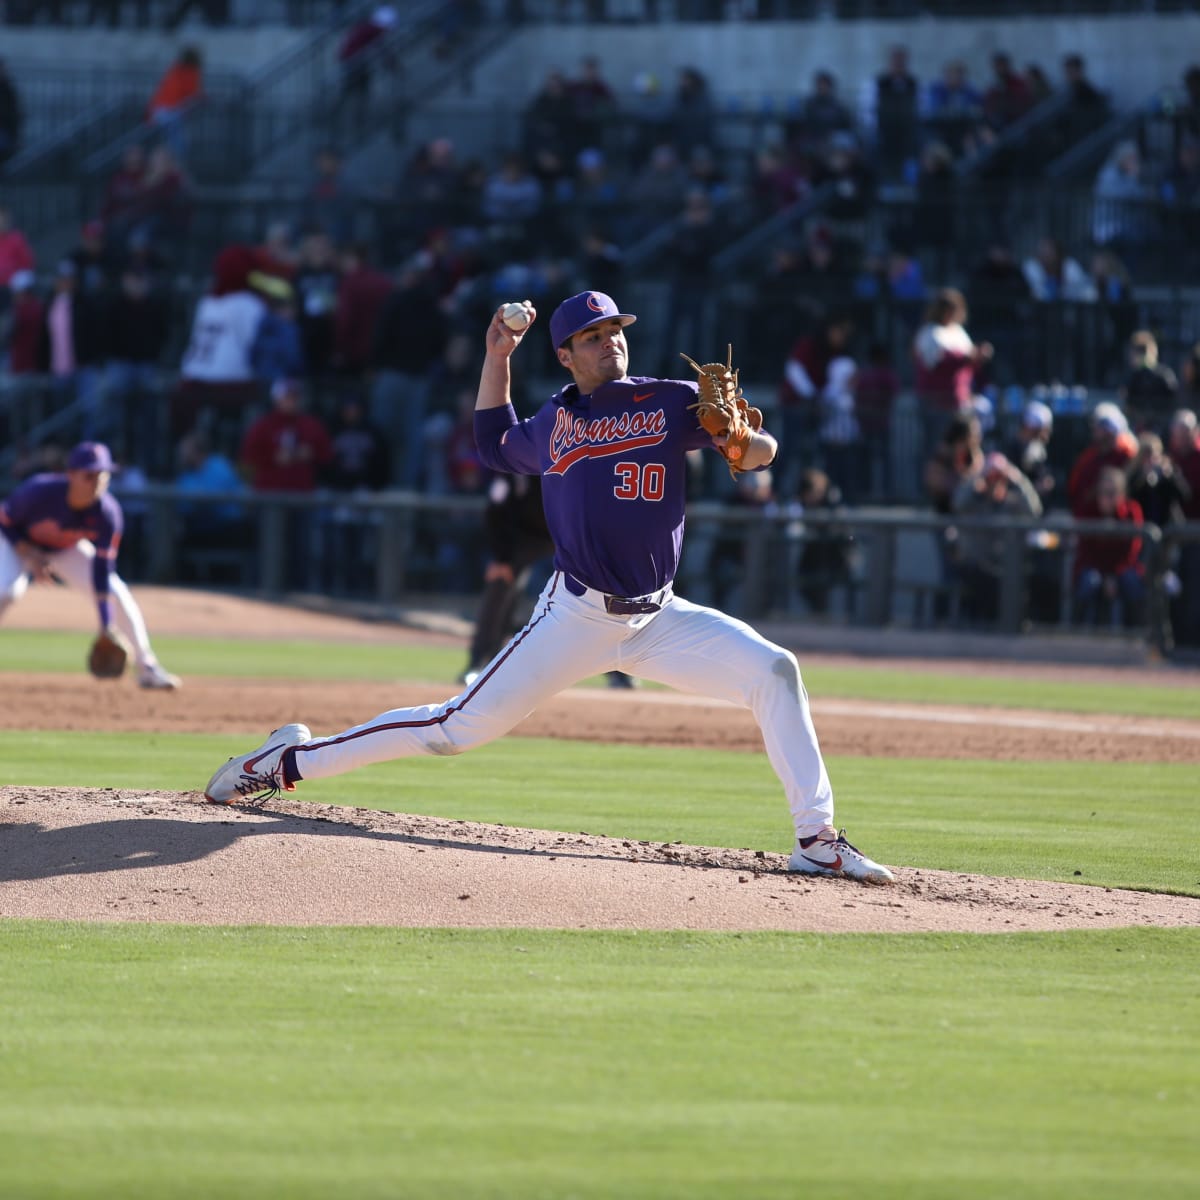 Clemson Baseball: Monte Lee expects 'big impact' from freshman class